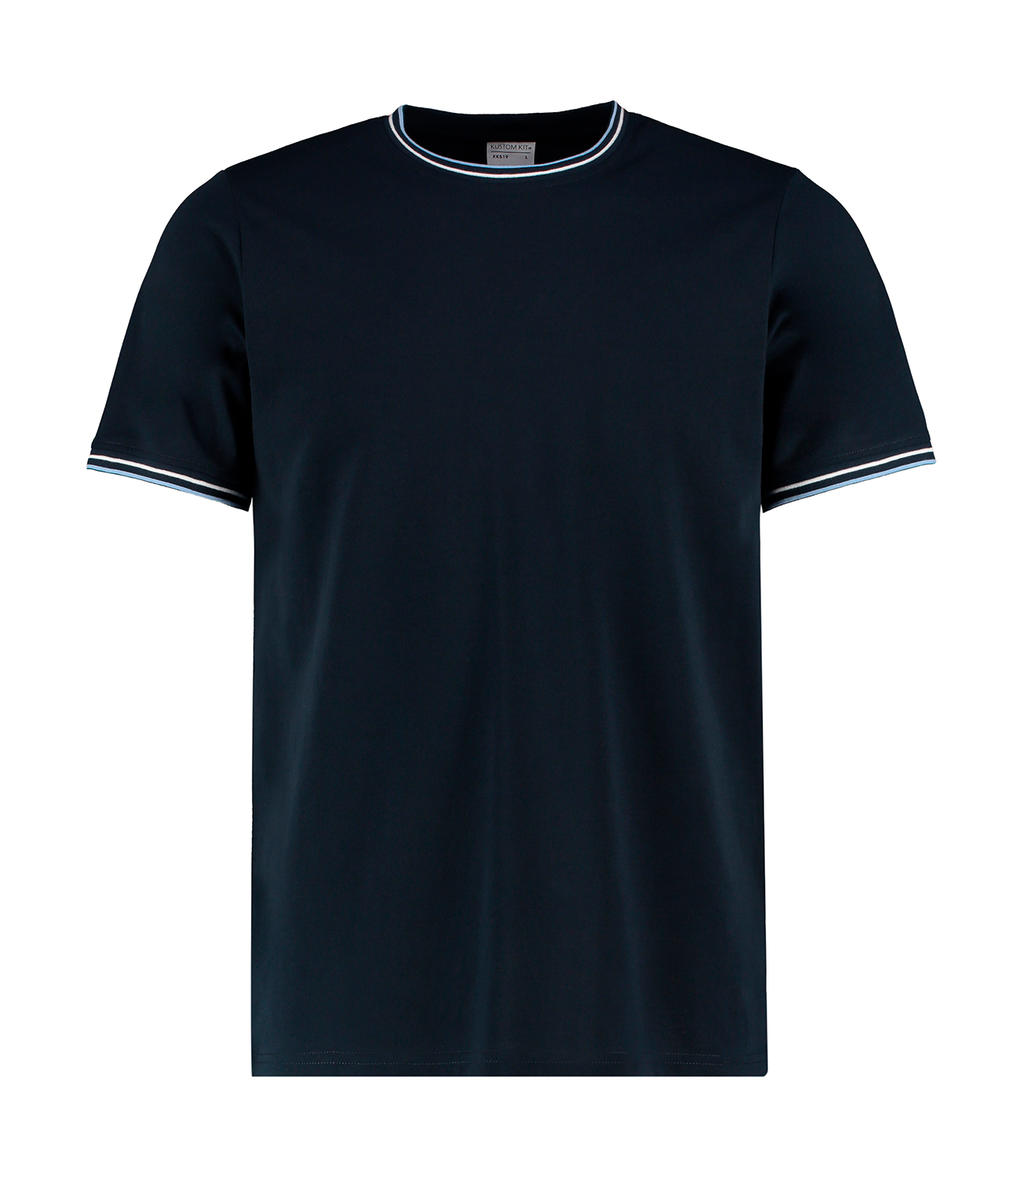  Fashion Fit Tipped Tee in Farbe Navy/White/Light Blue